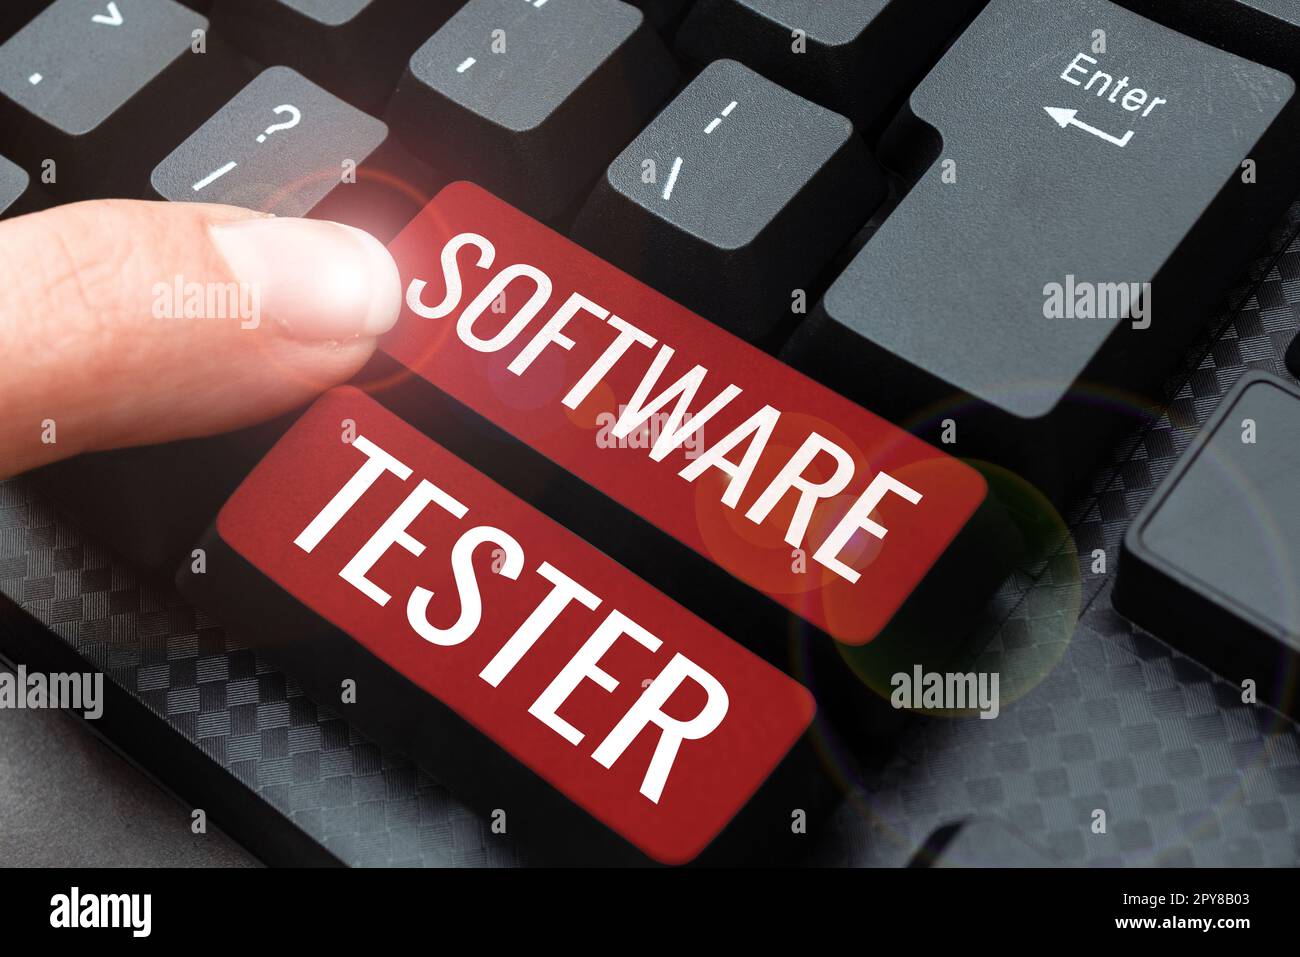 Conceptual caption Software Tester. Concept meaning implemented to protect software against malicious attack Stock Photo